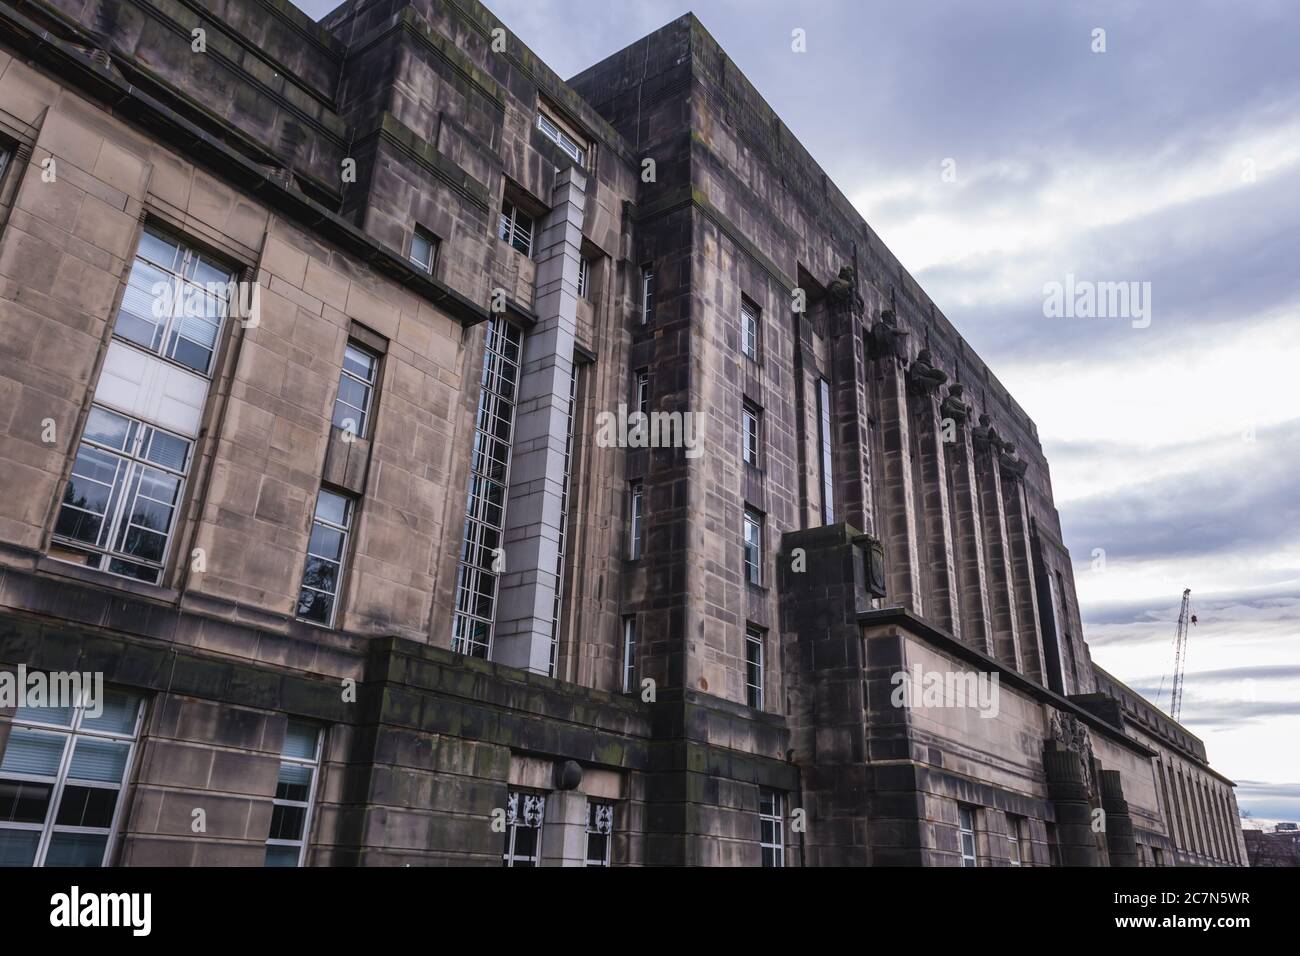 St Andrews House on Calton Hill, headquarters building of the Scottish Government in Edinburgh, the capital of Scotland, part of United Kingdom Stock Photo